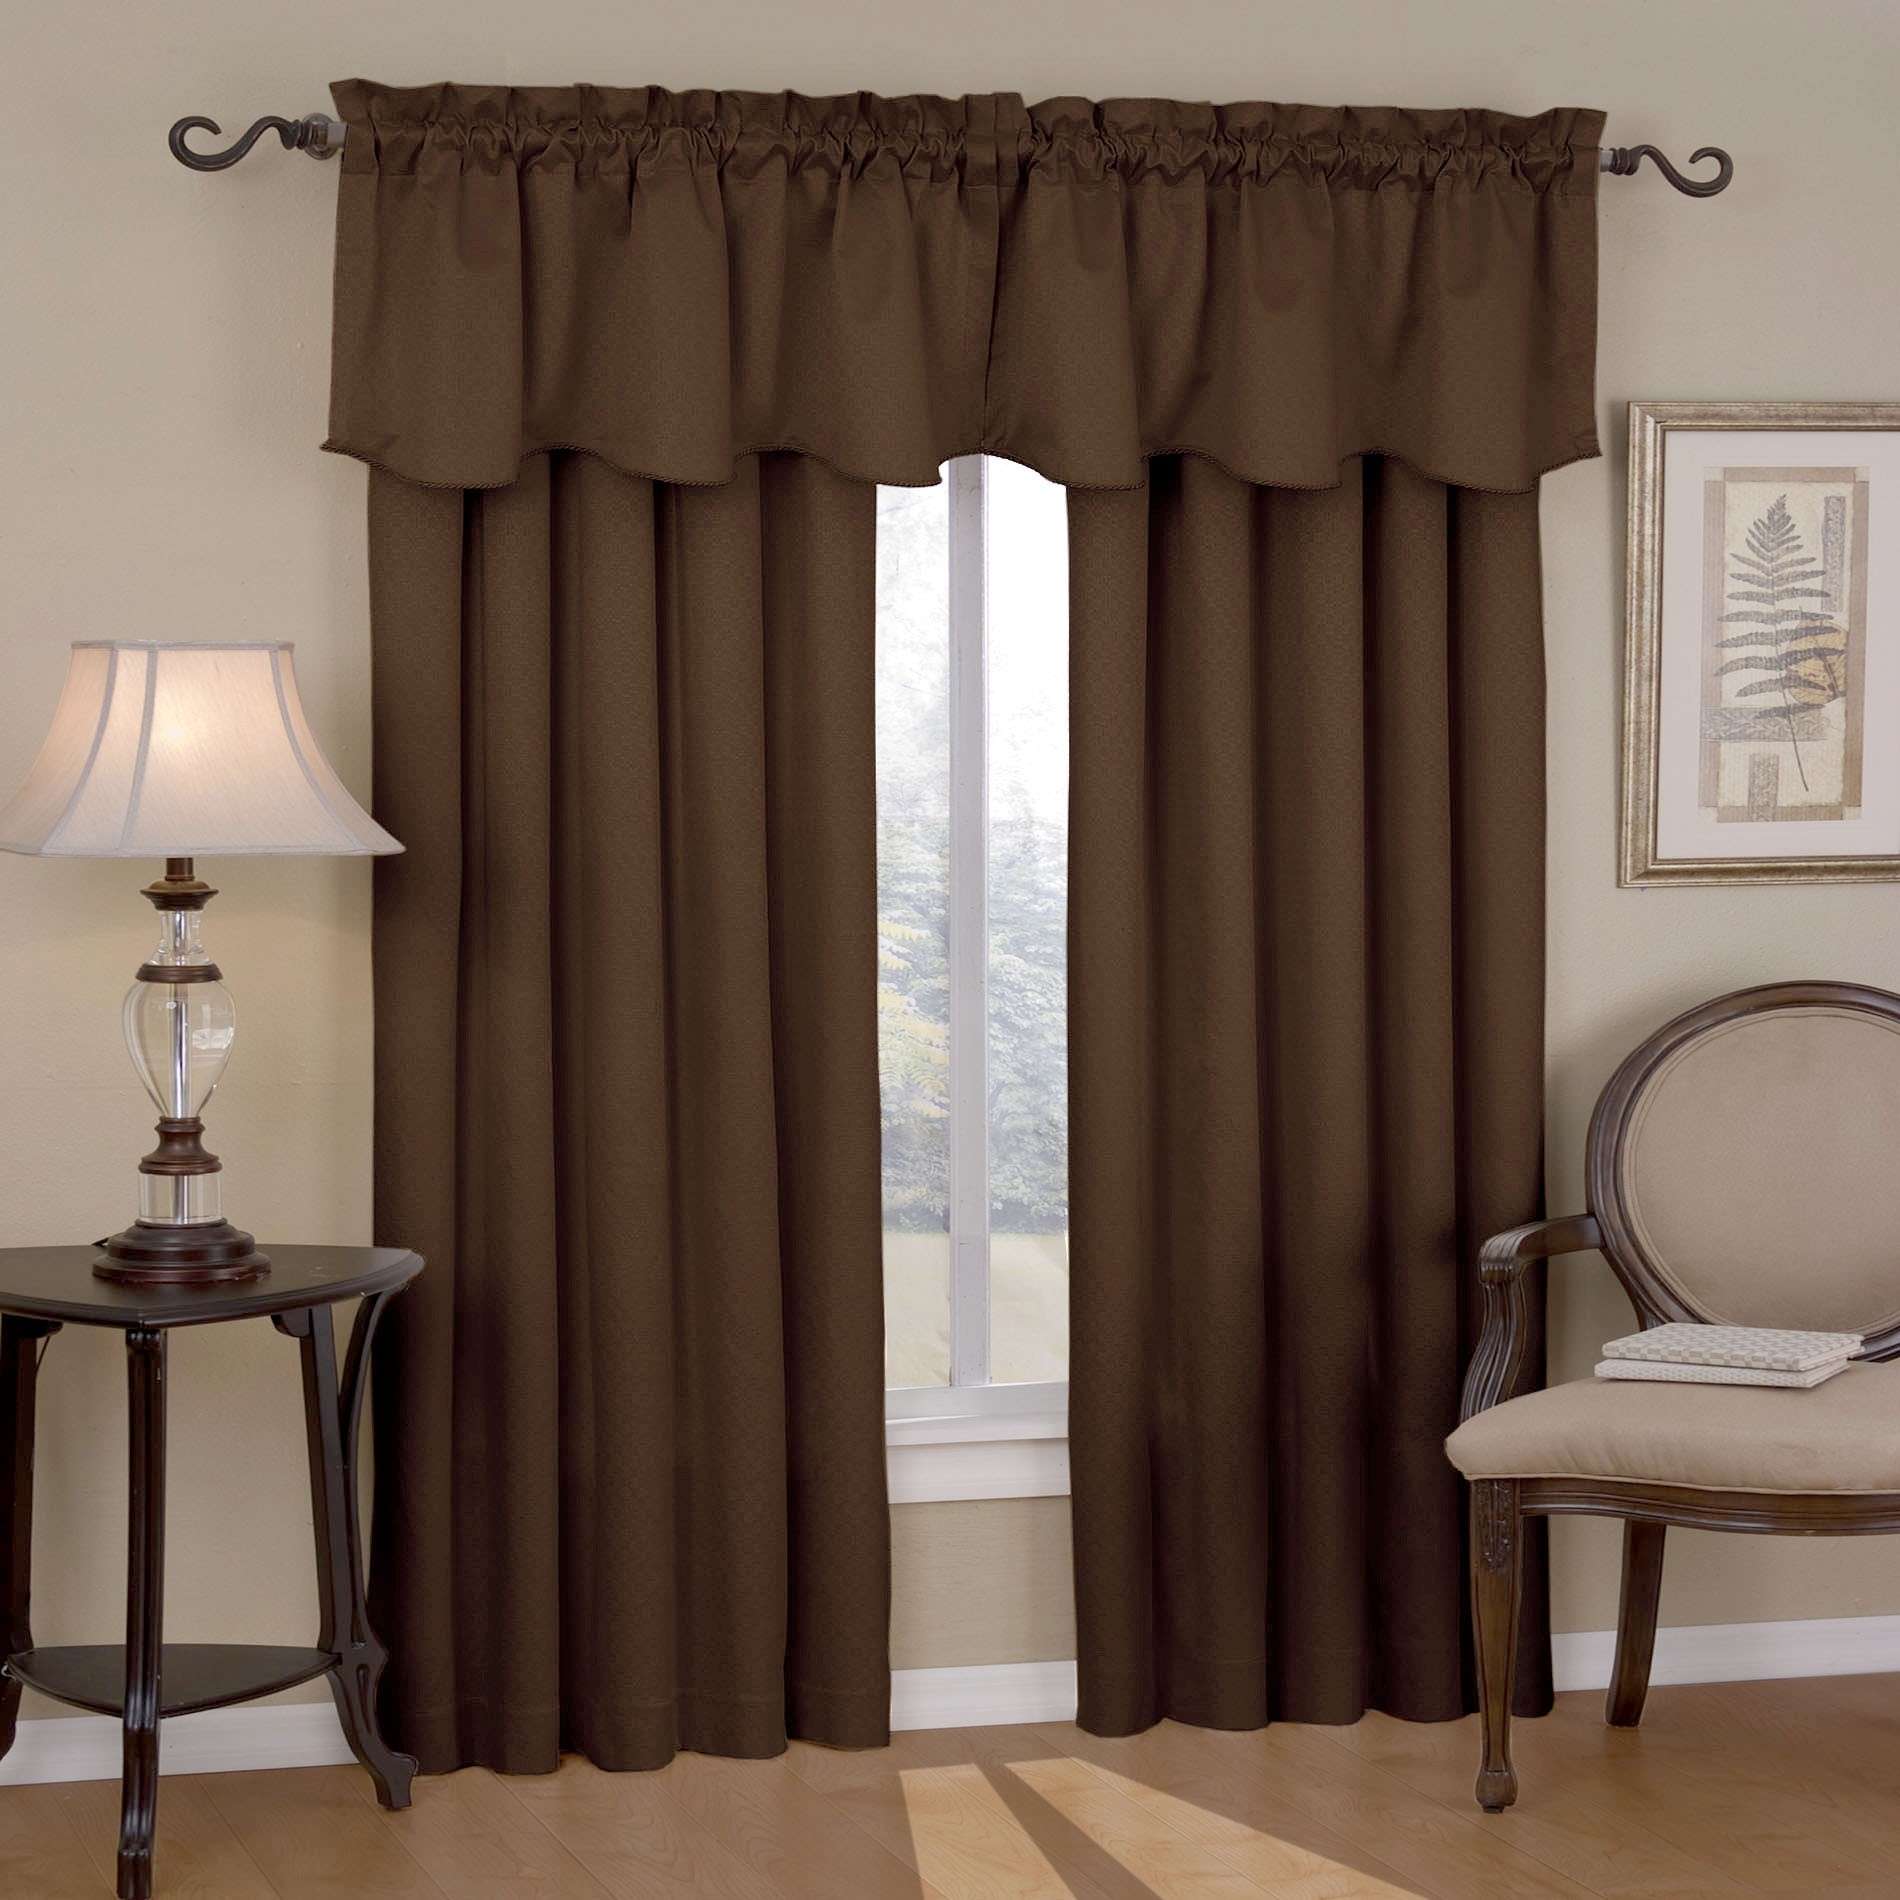 eclipse-rideaux-canova-blackout-rideaux-and-valance-set-in-chocolate